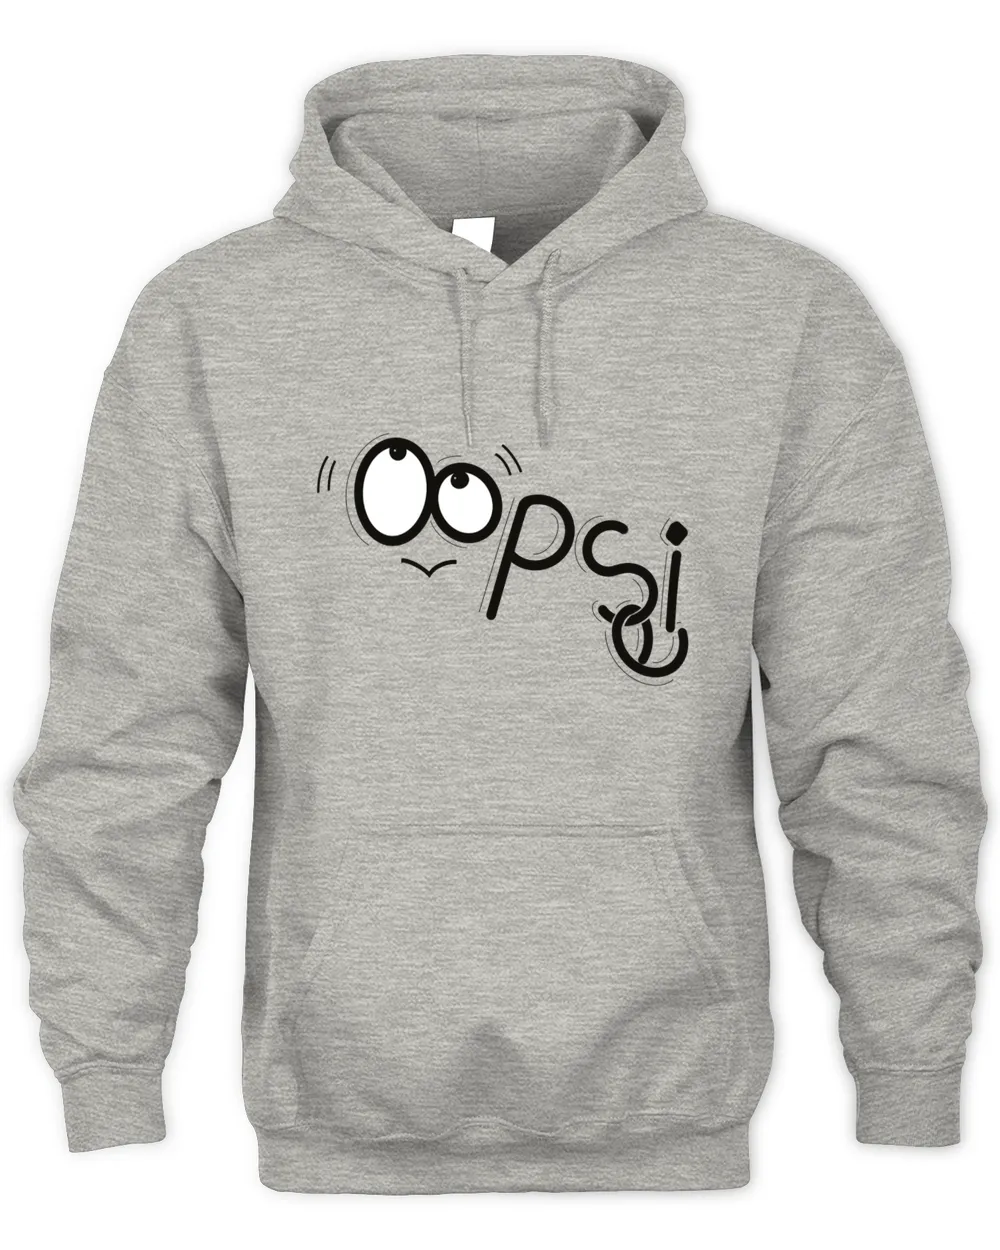 OOPSIE - Hilarious and Funny Apparel Collection